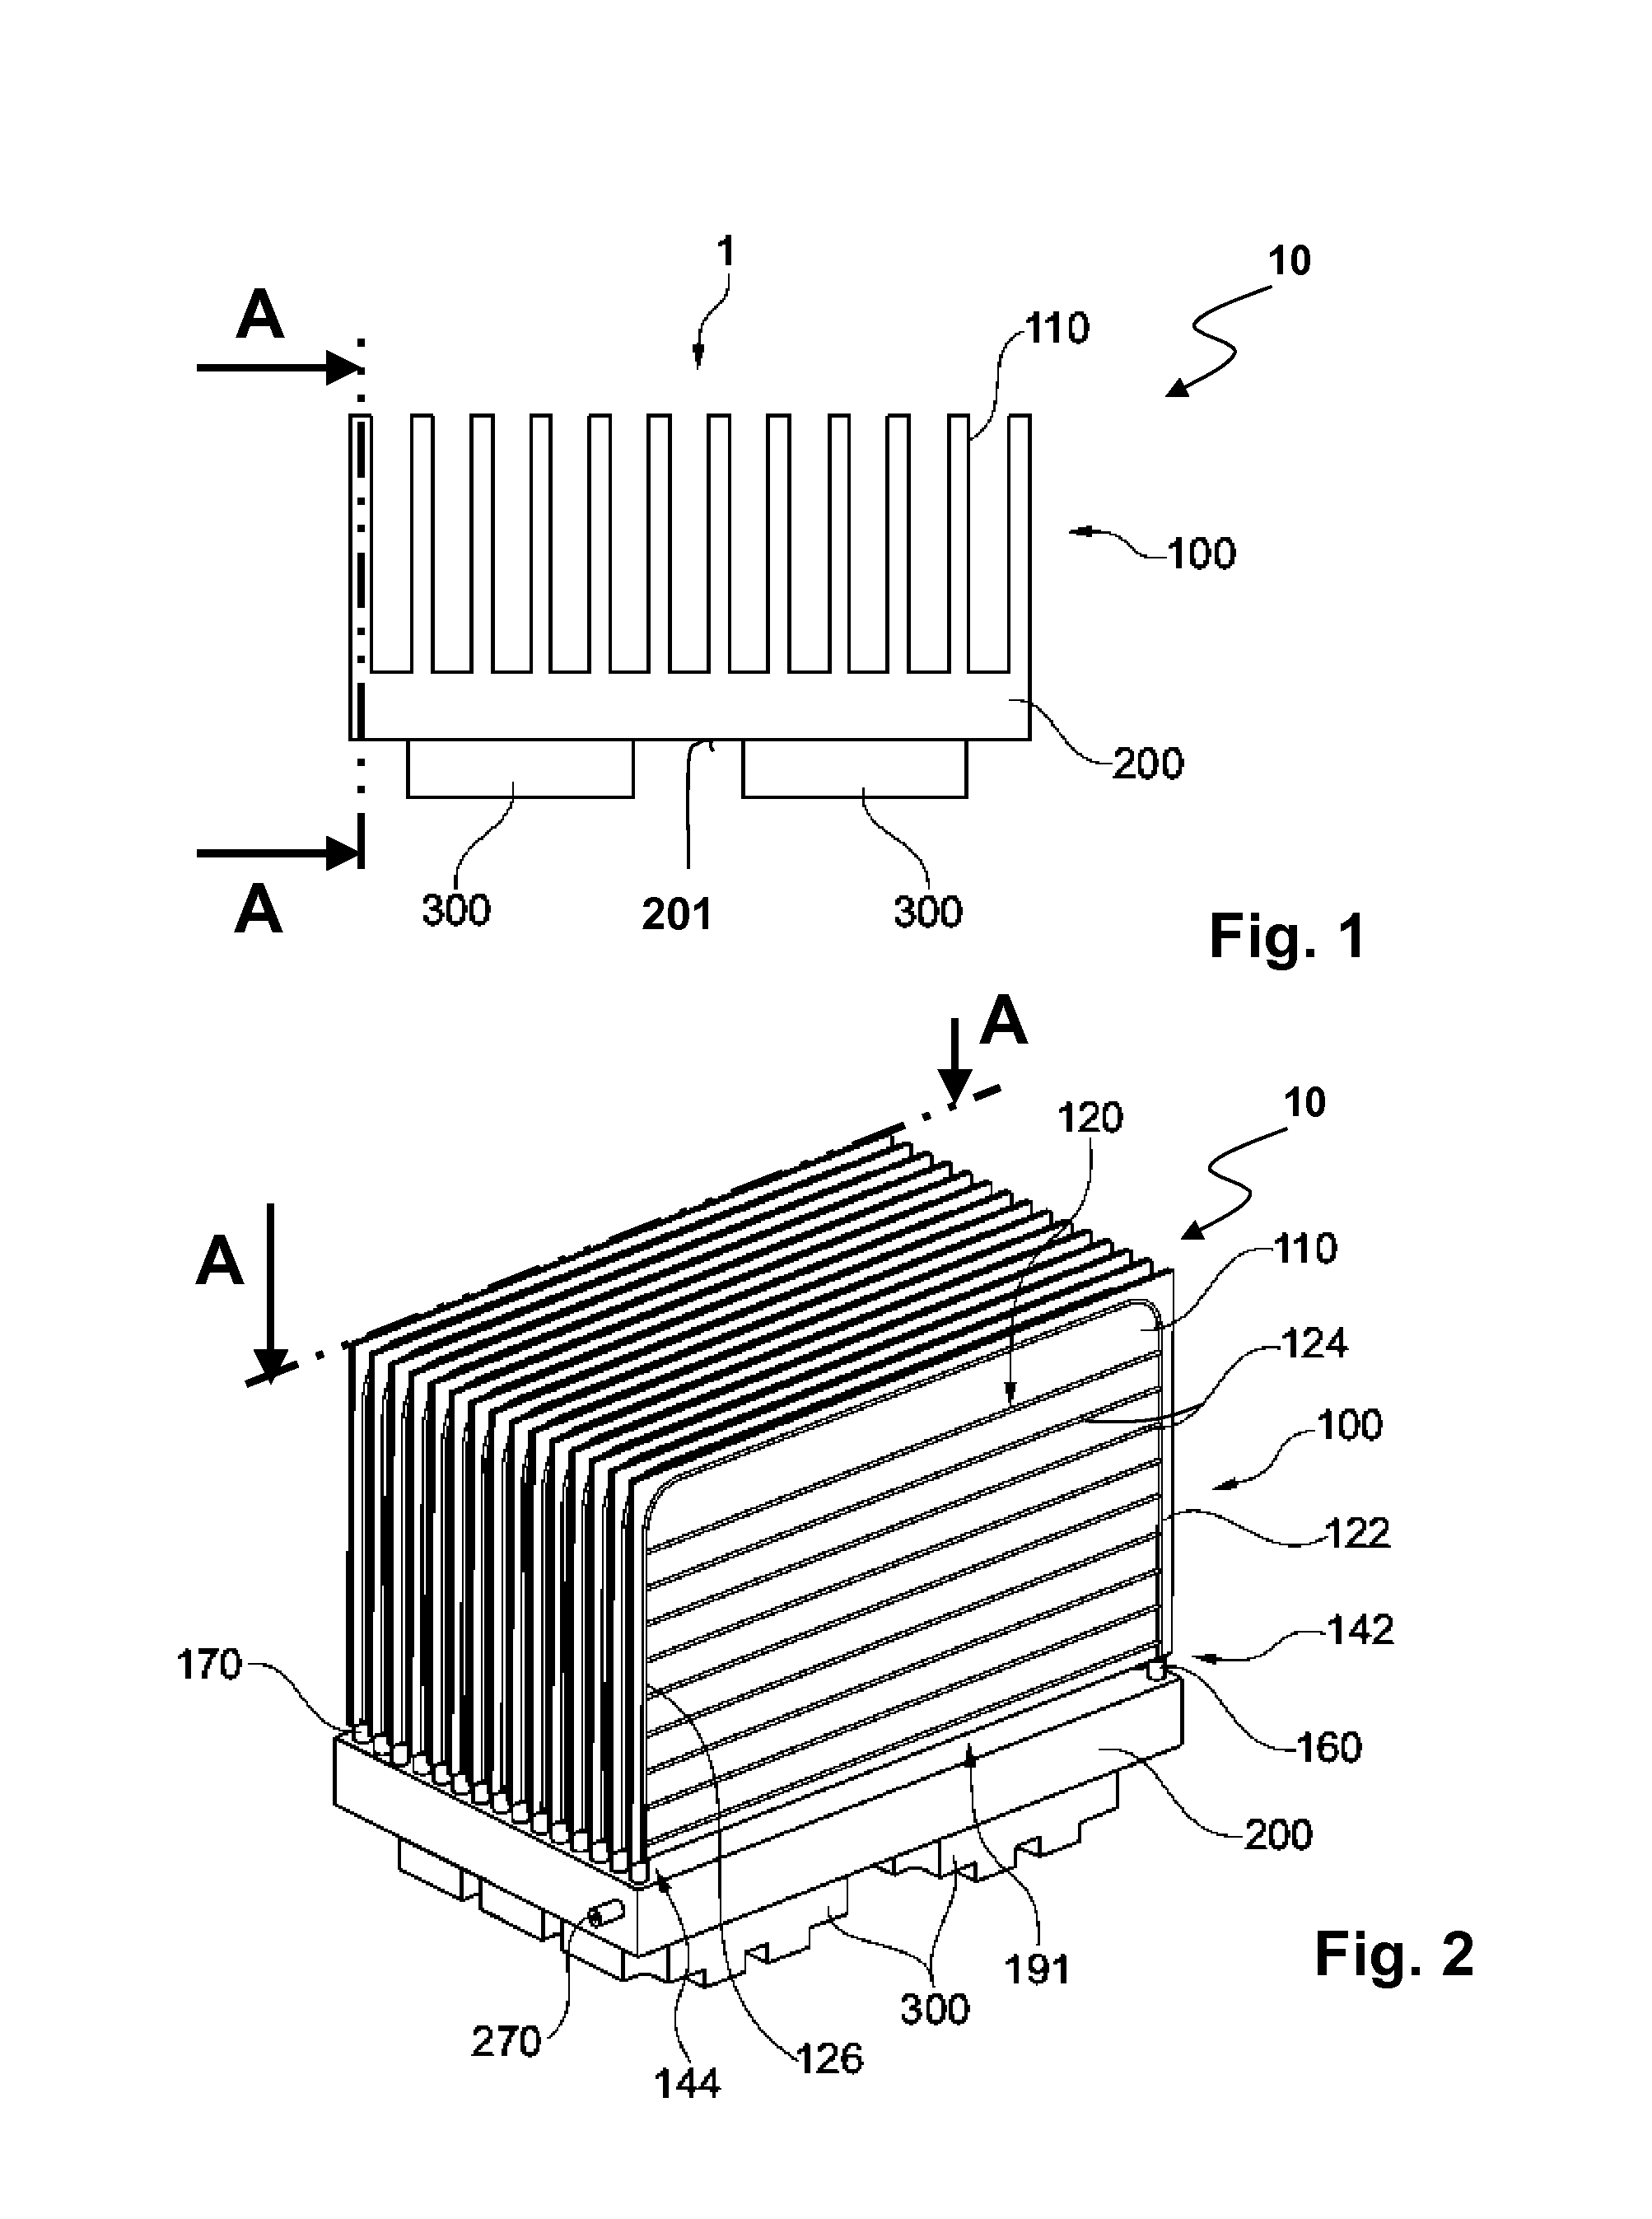 Two-phase cooling system for electronic components